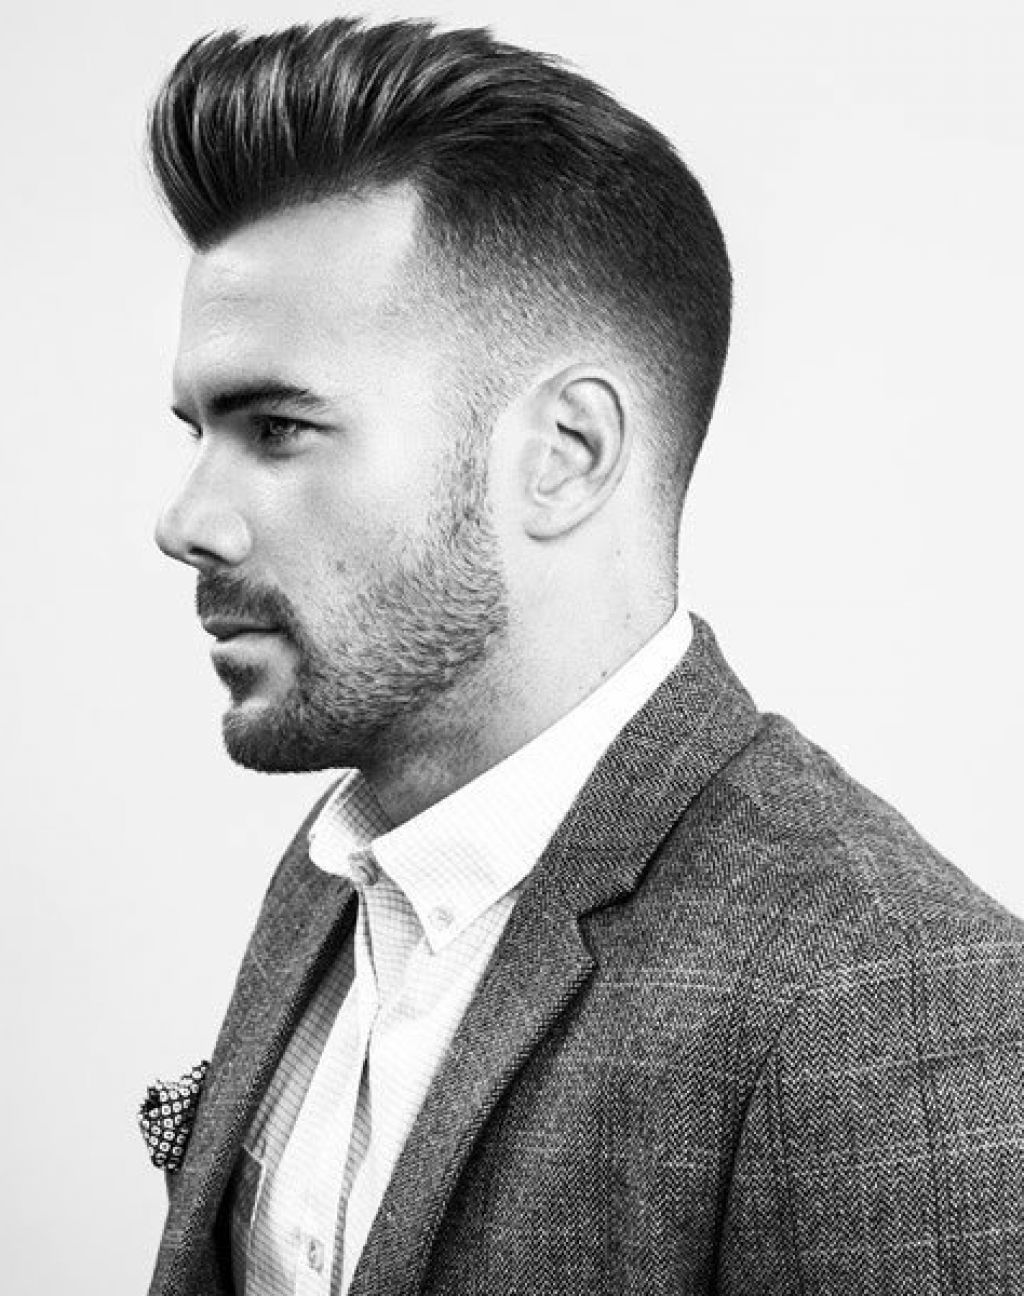  pompadour hairstyles for men awesome